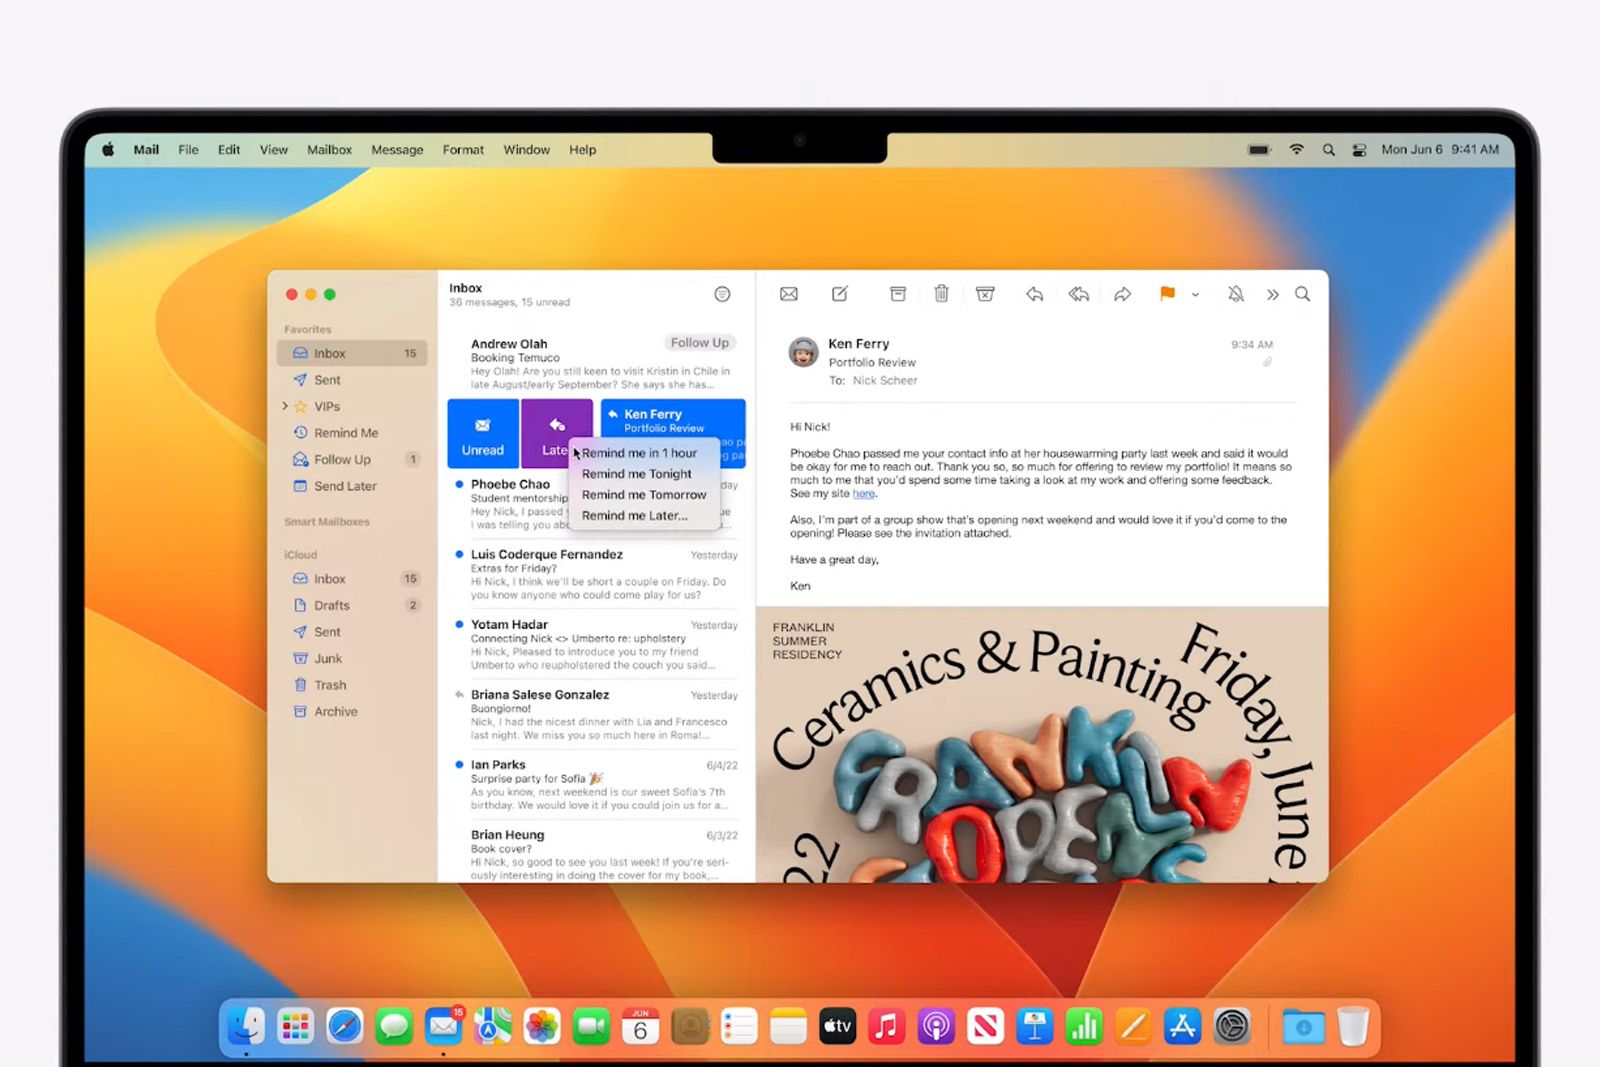 macOS Ventura brings new features like Stage Manager and other enhancements to Mac photo 2